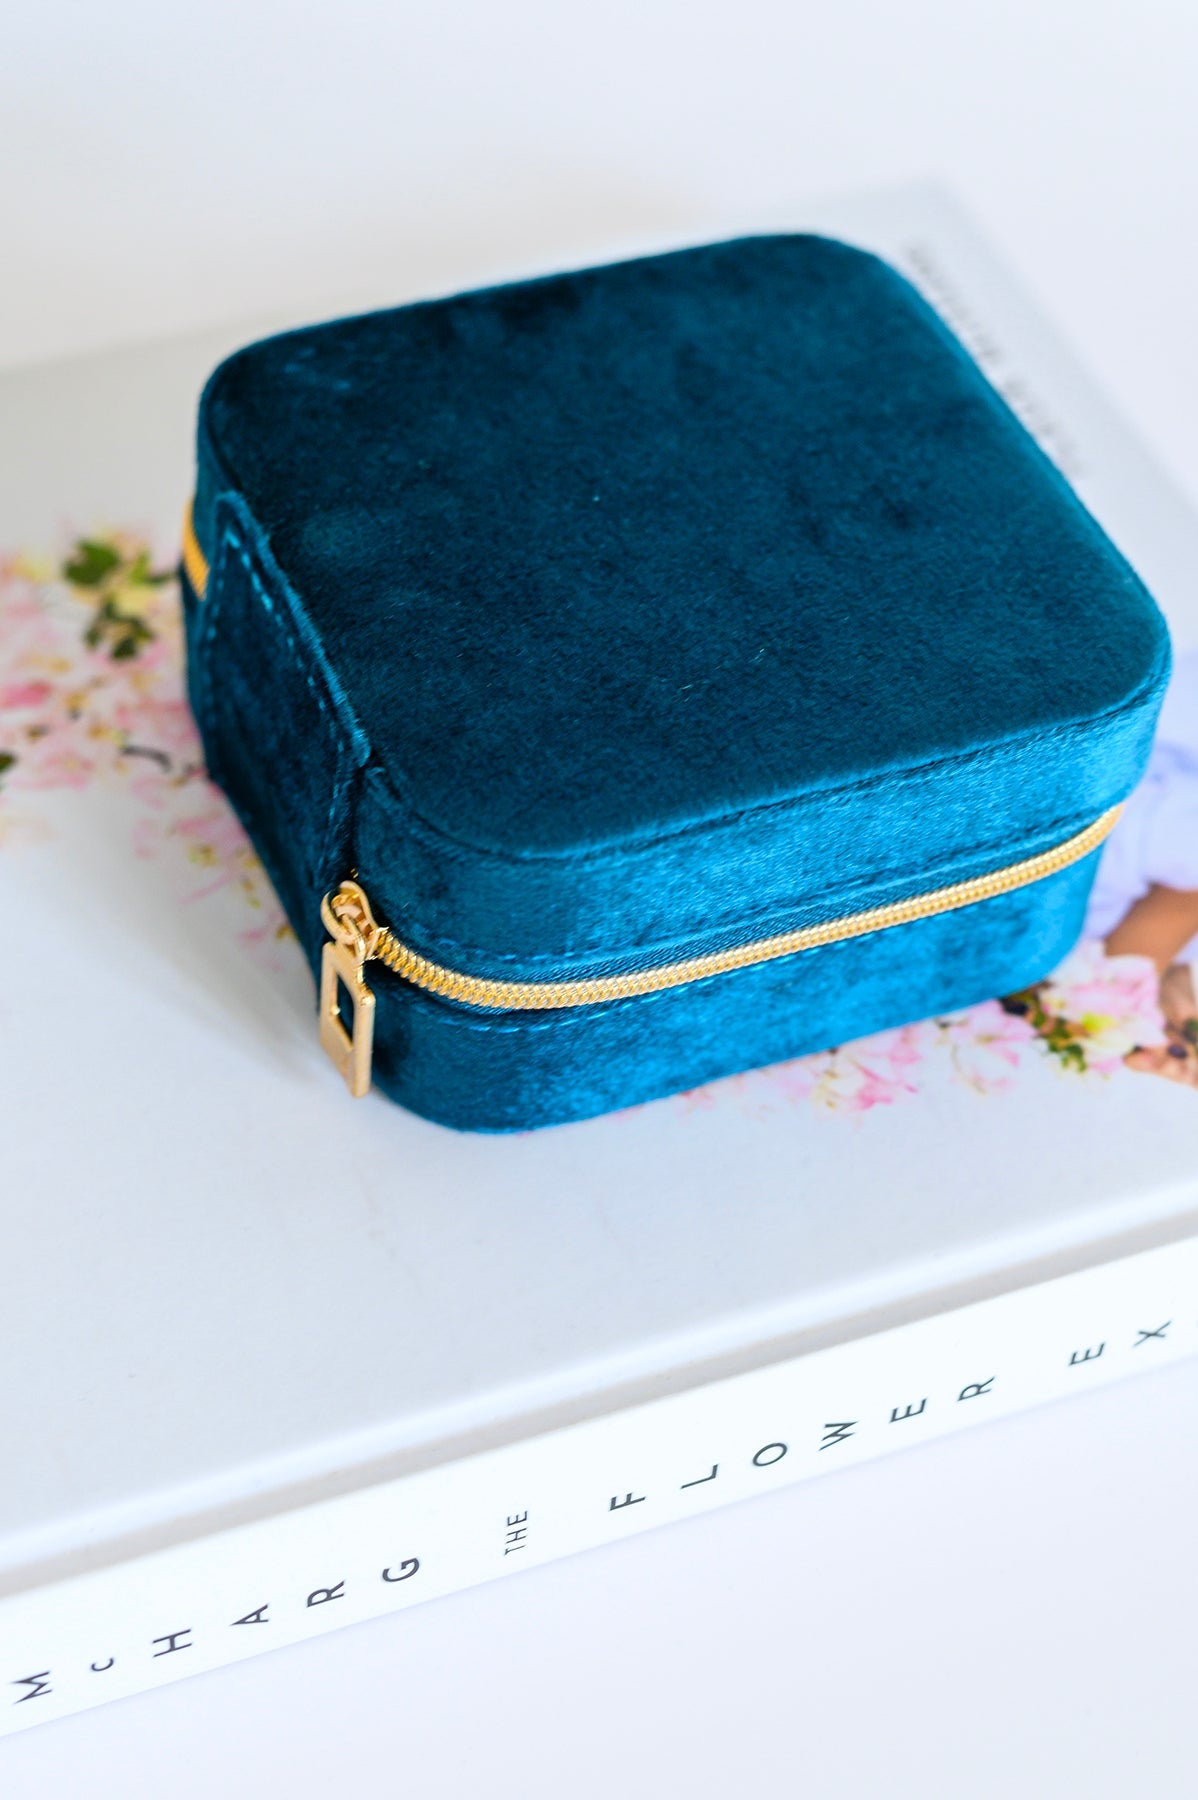 Kept and Carried Velvet Jewlery Box in Teal